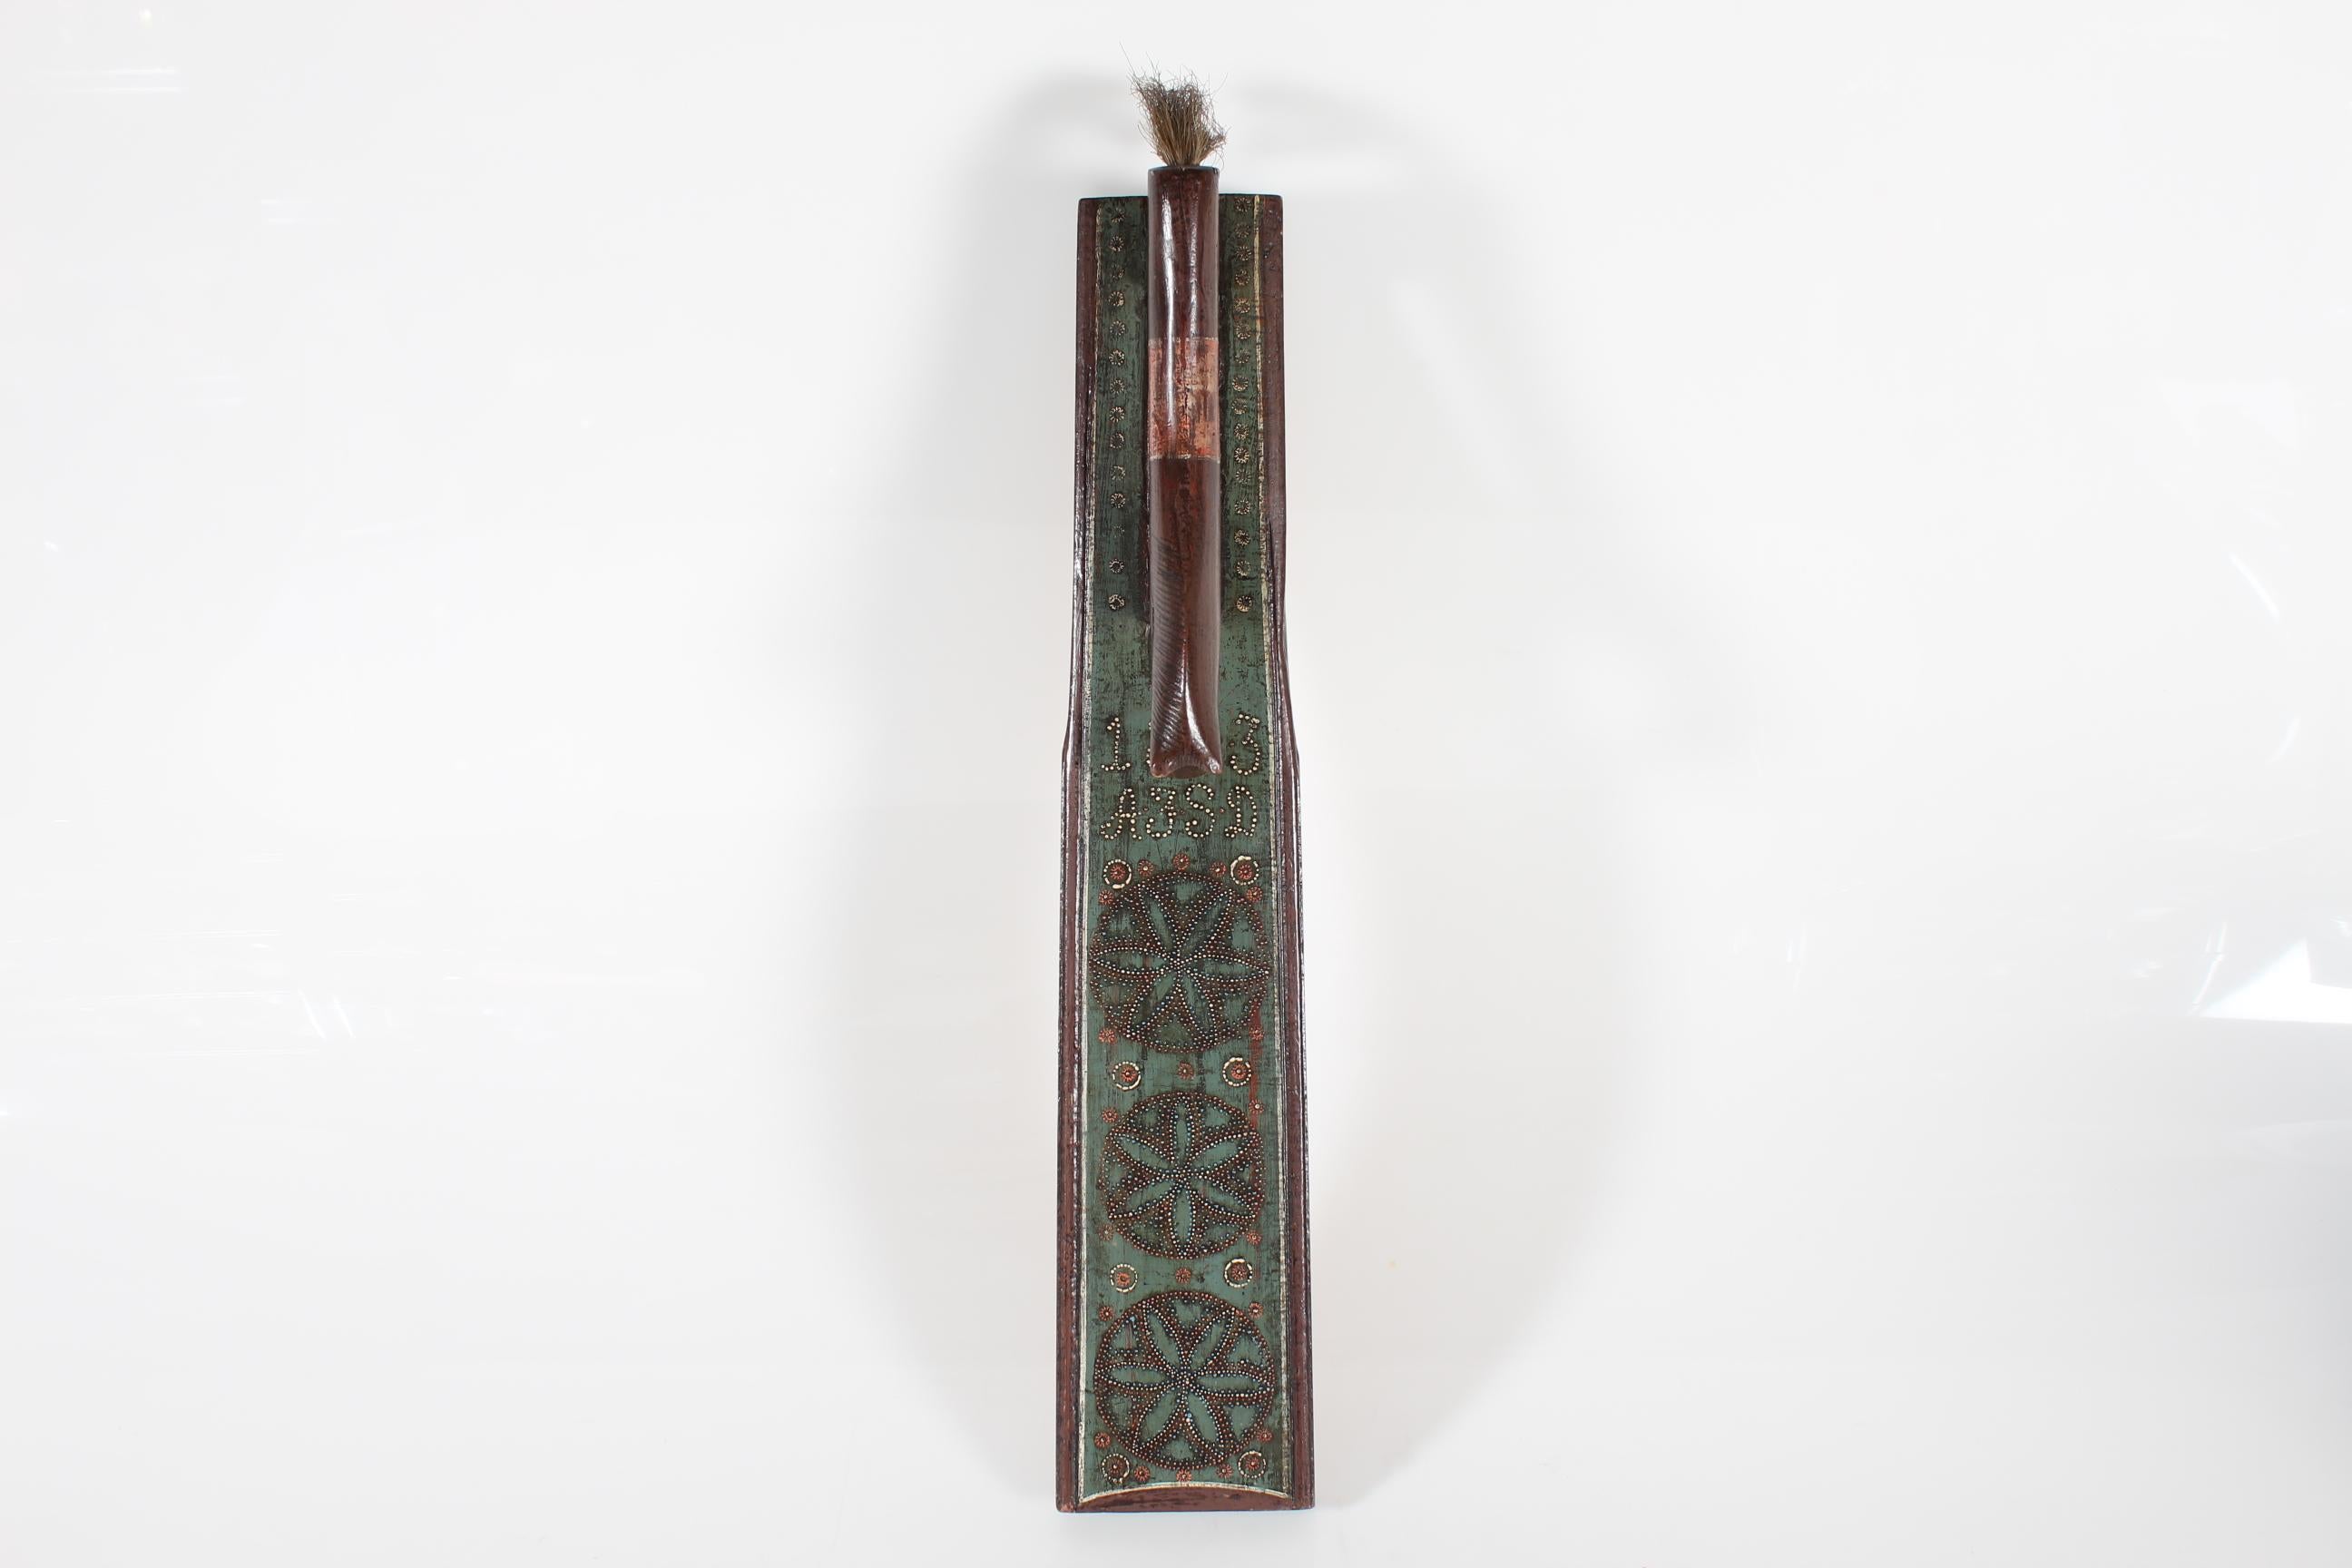 Antique Danish mangle board (clothing and bedding press) dated 1803.

It is made from oak wood which is hand carved with a rich decoration of geometric blossoms. Painted in the colours green, white, brown and reddish brown. The handle is a carved